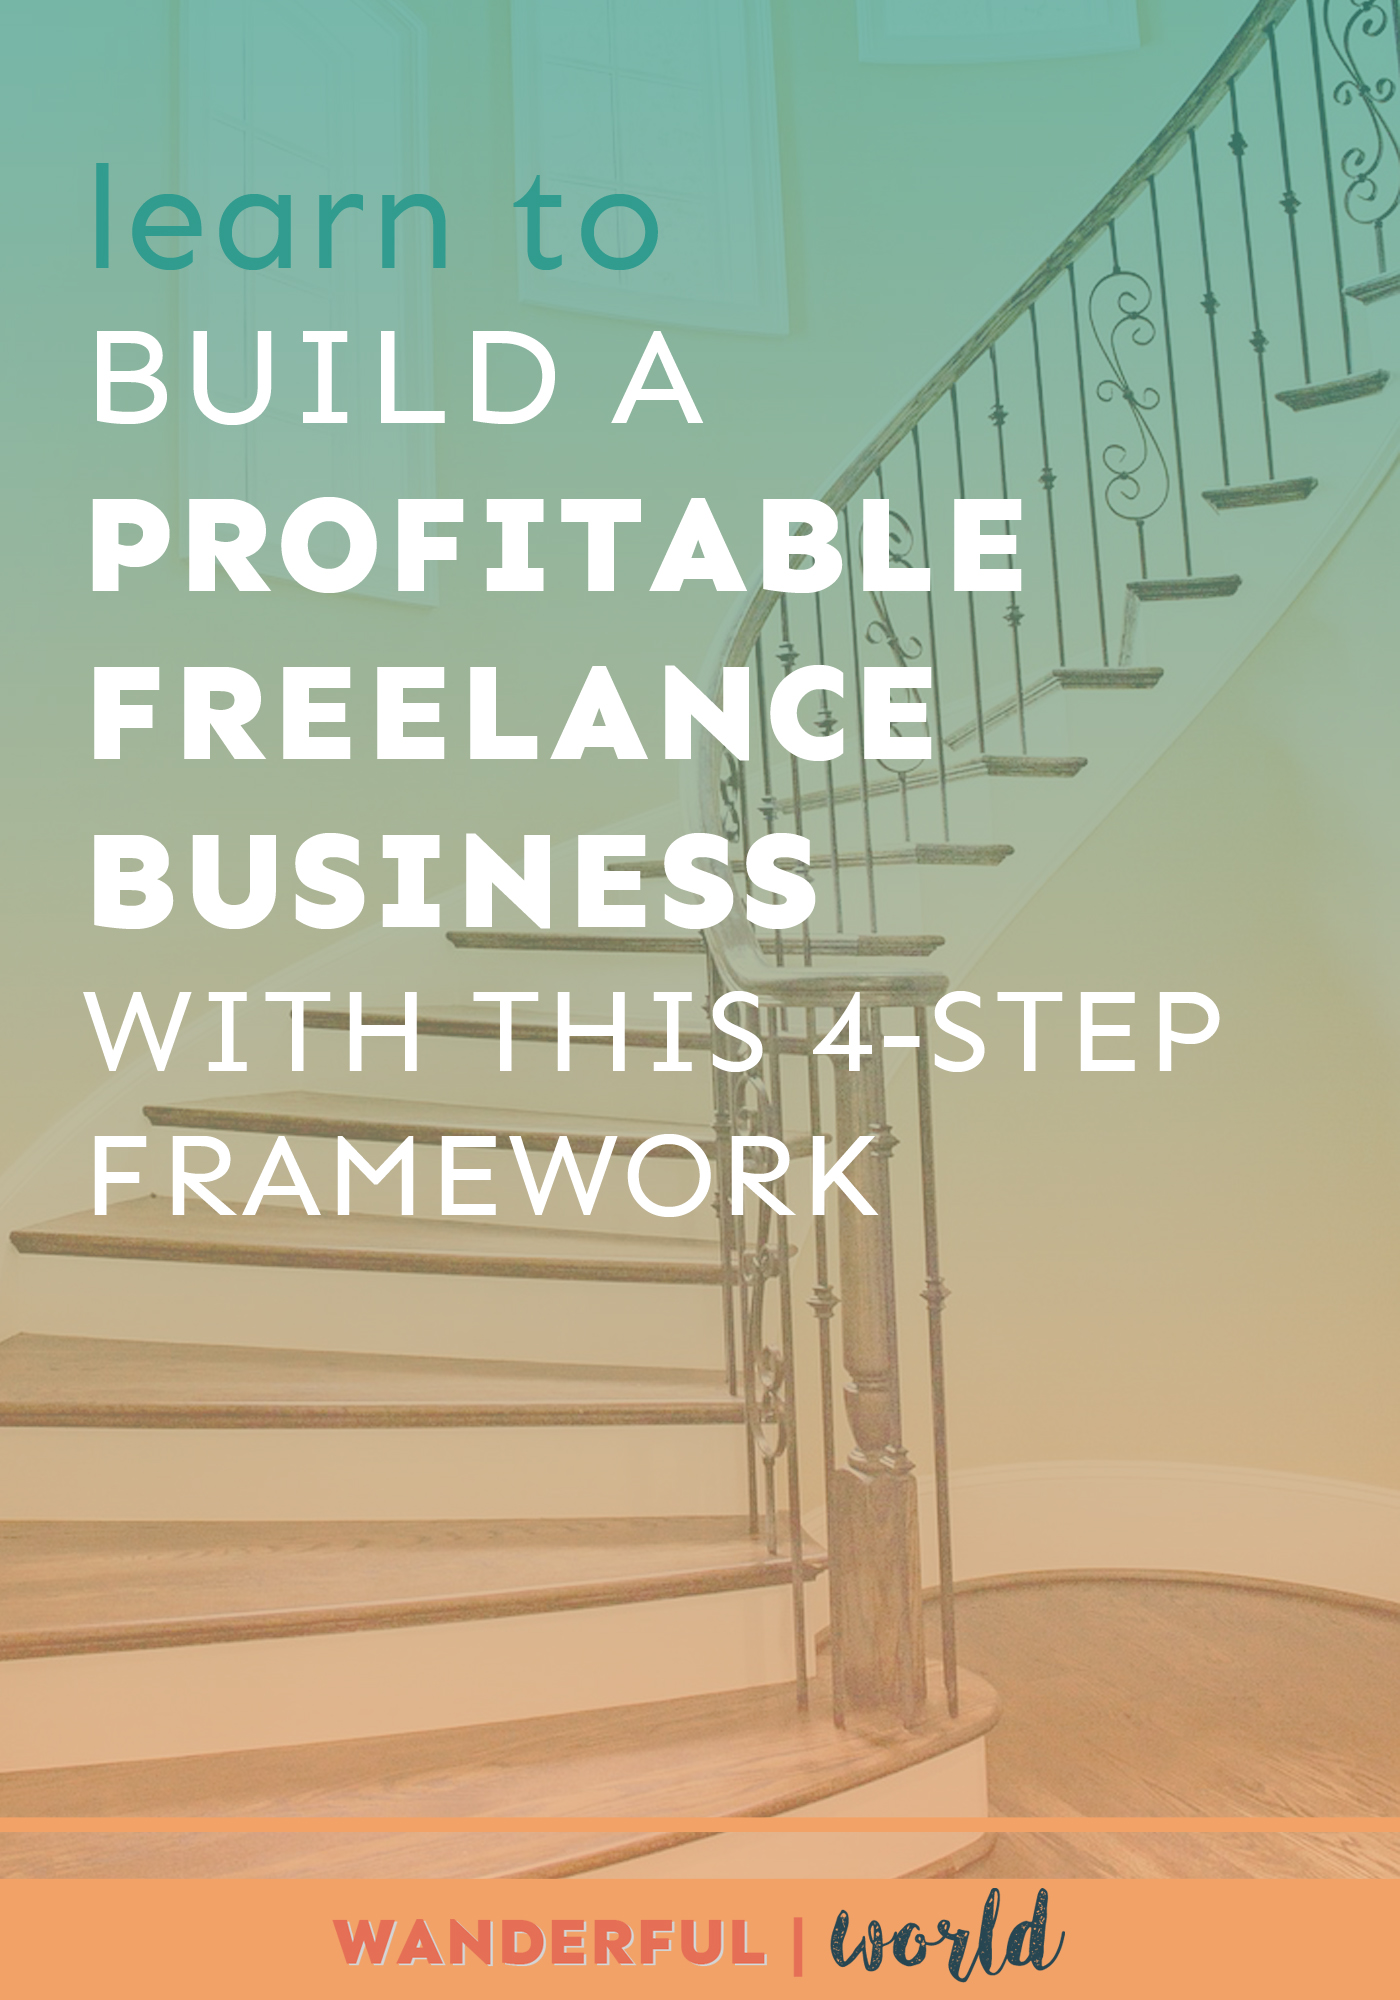 Ready to build a profitable freelance business? Here's the 4-step framework you need.